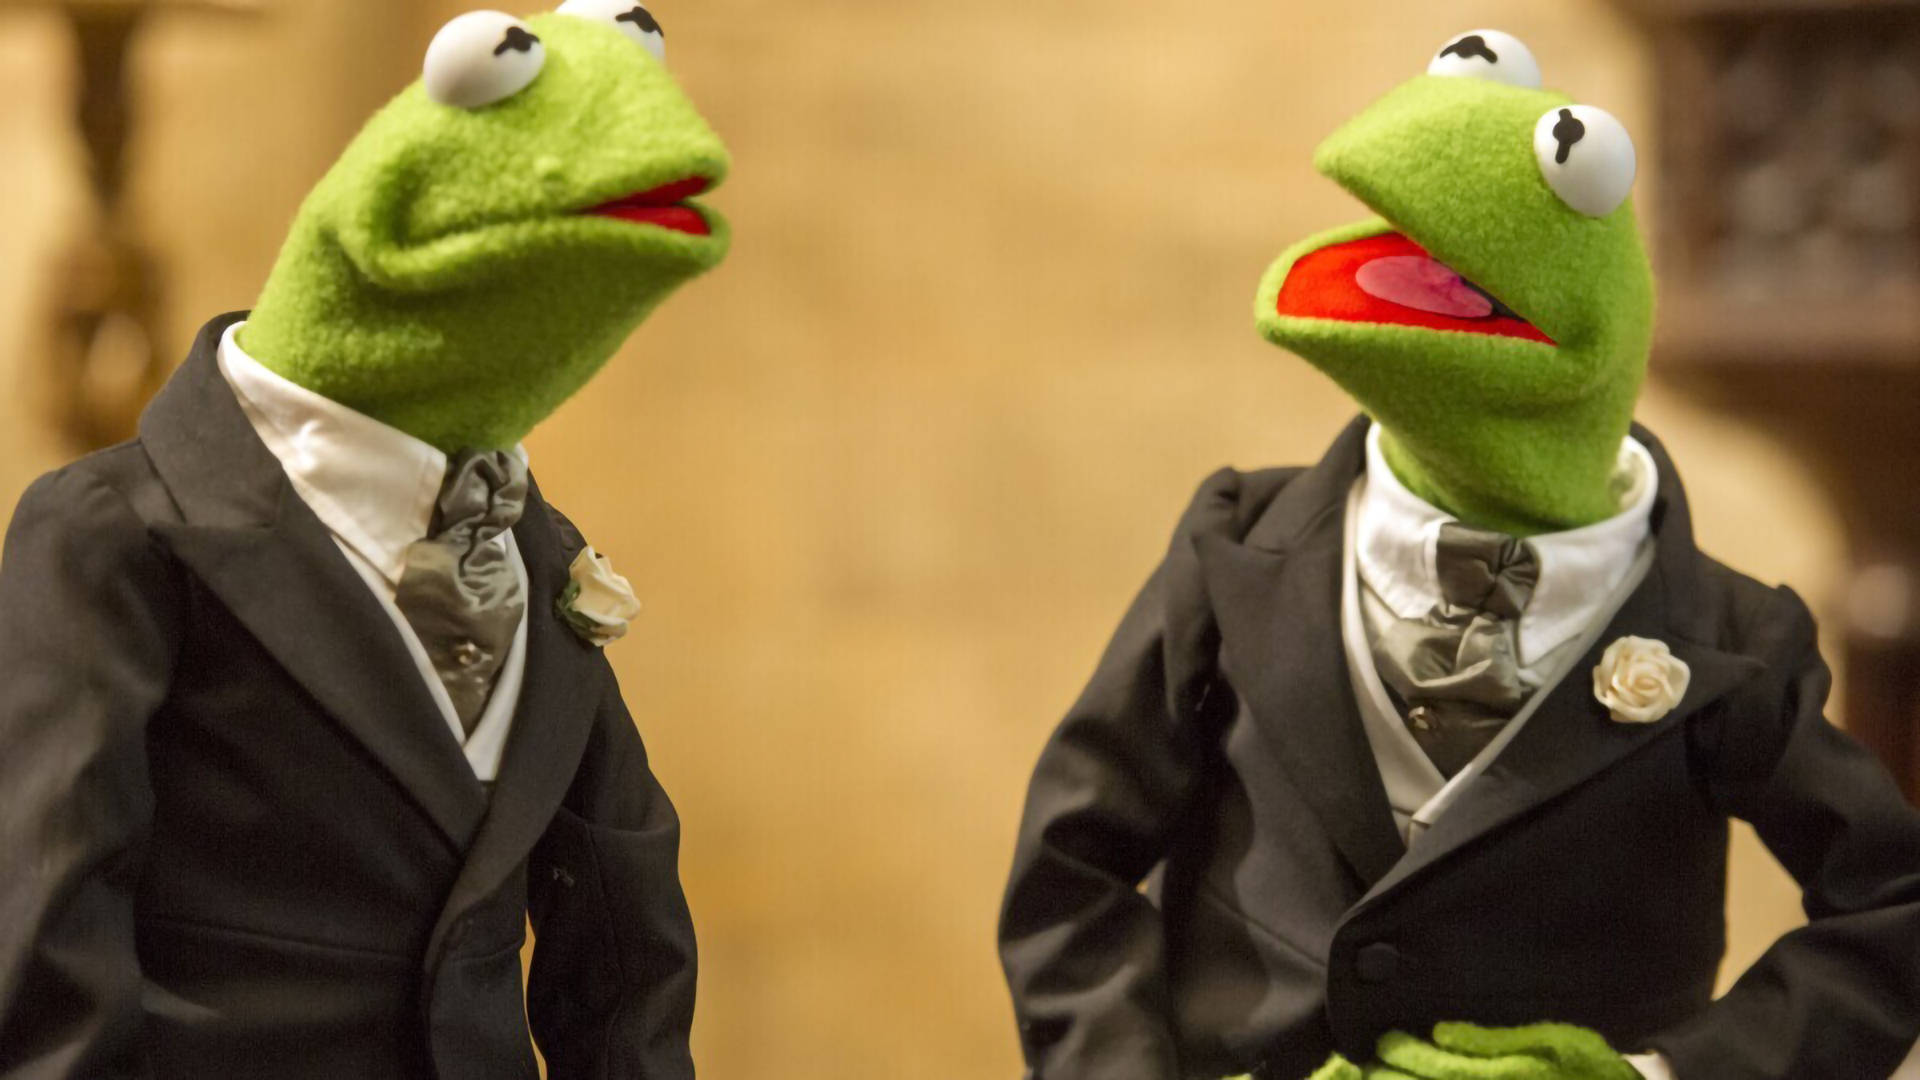 Kermit The Frog Interacting With His Look-alike In Muppets Most Wanted. Background